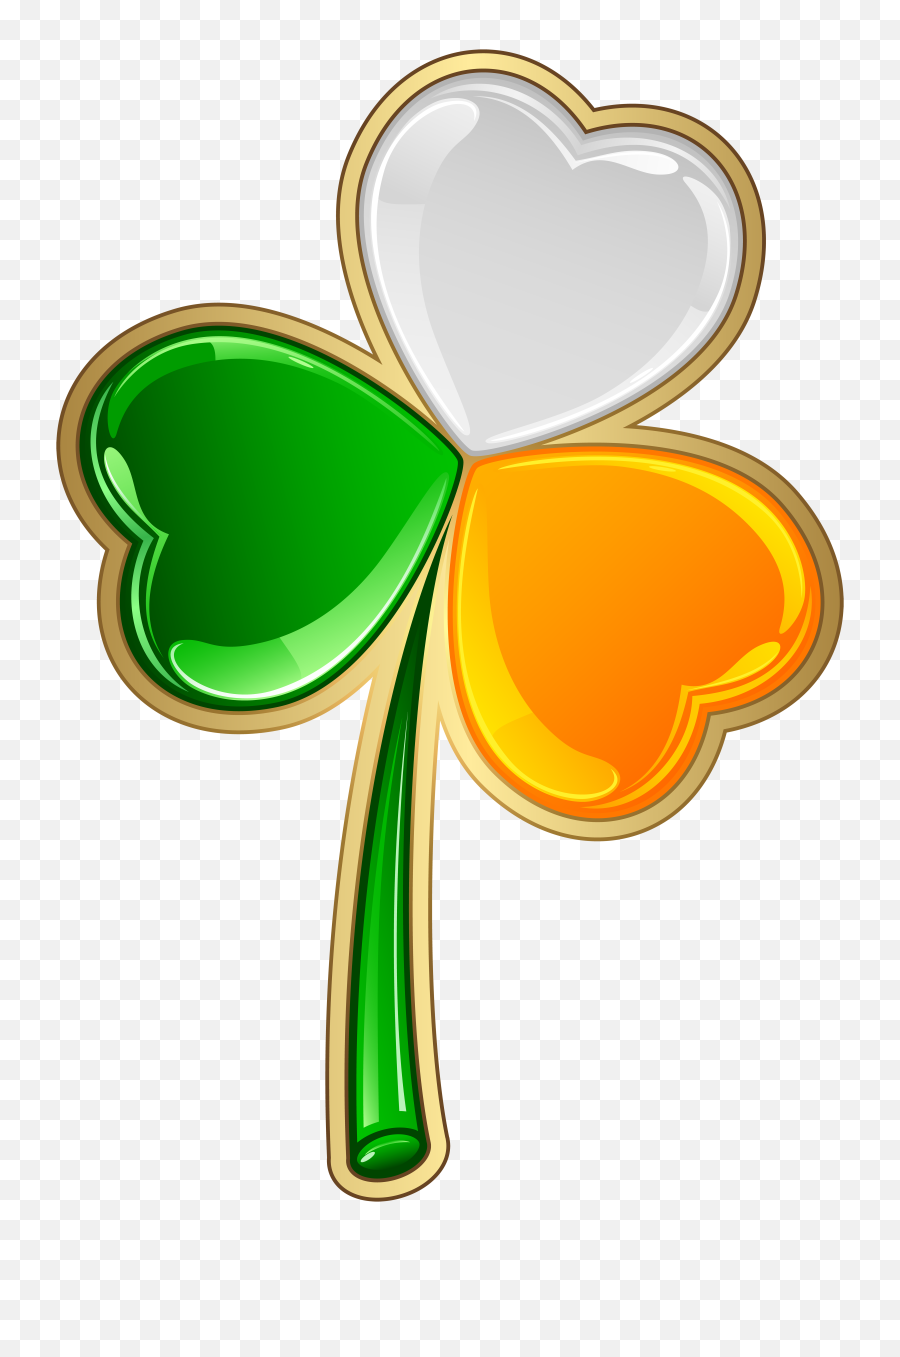 Microphone Clipart Png Irish Flags Filenuvola Flagsvg - Irish Shamrock Transparent,Microphone Clipart Transparent